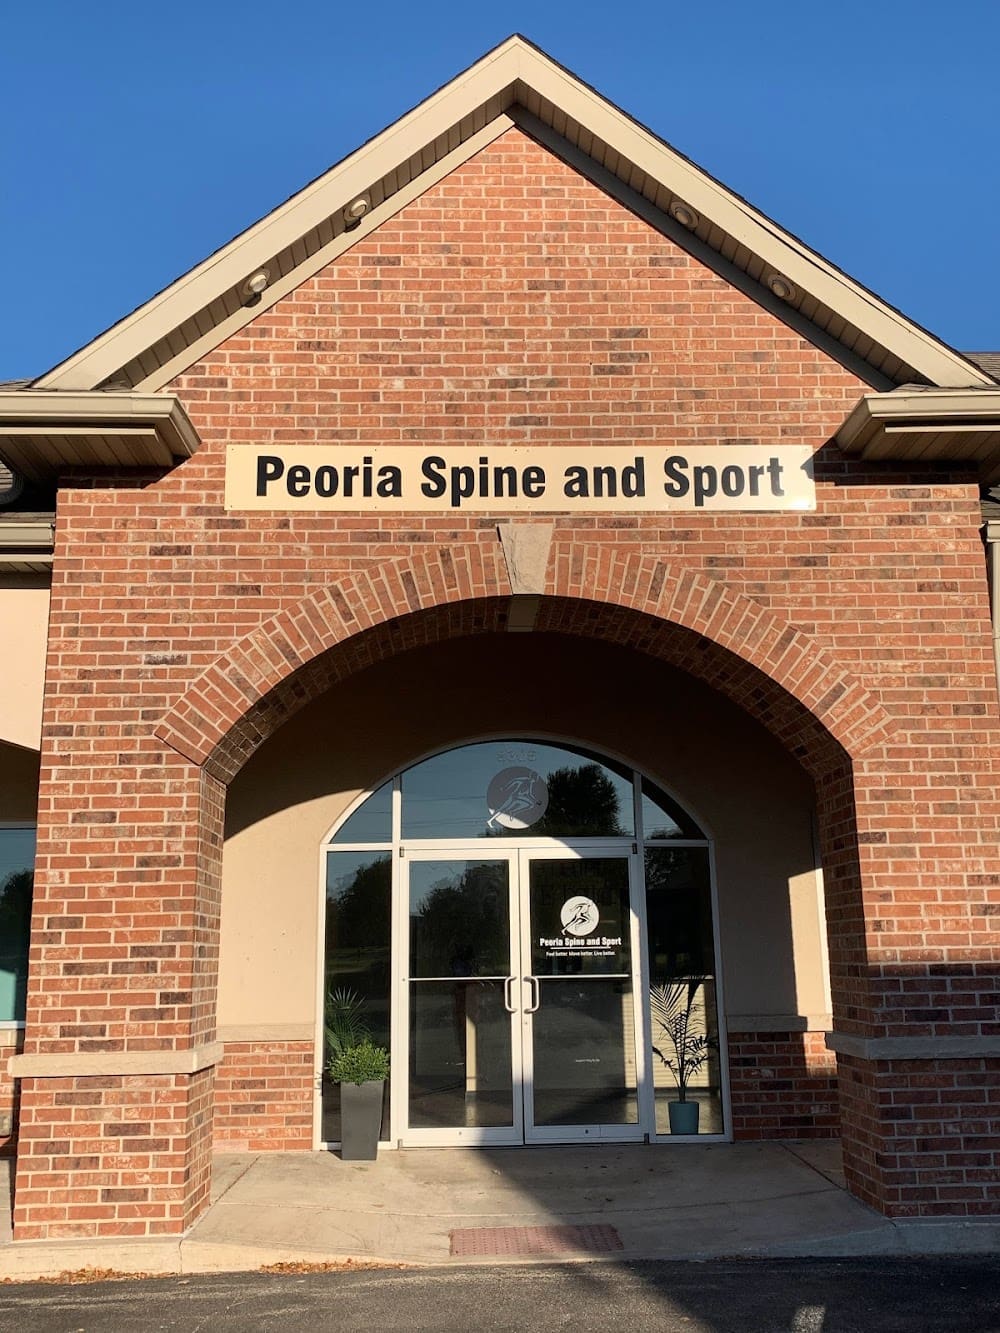 Peoria Spine and Sport